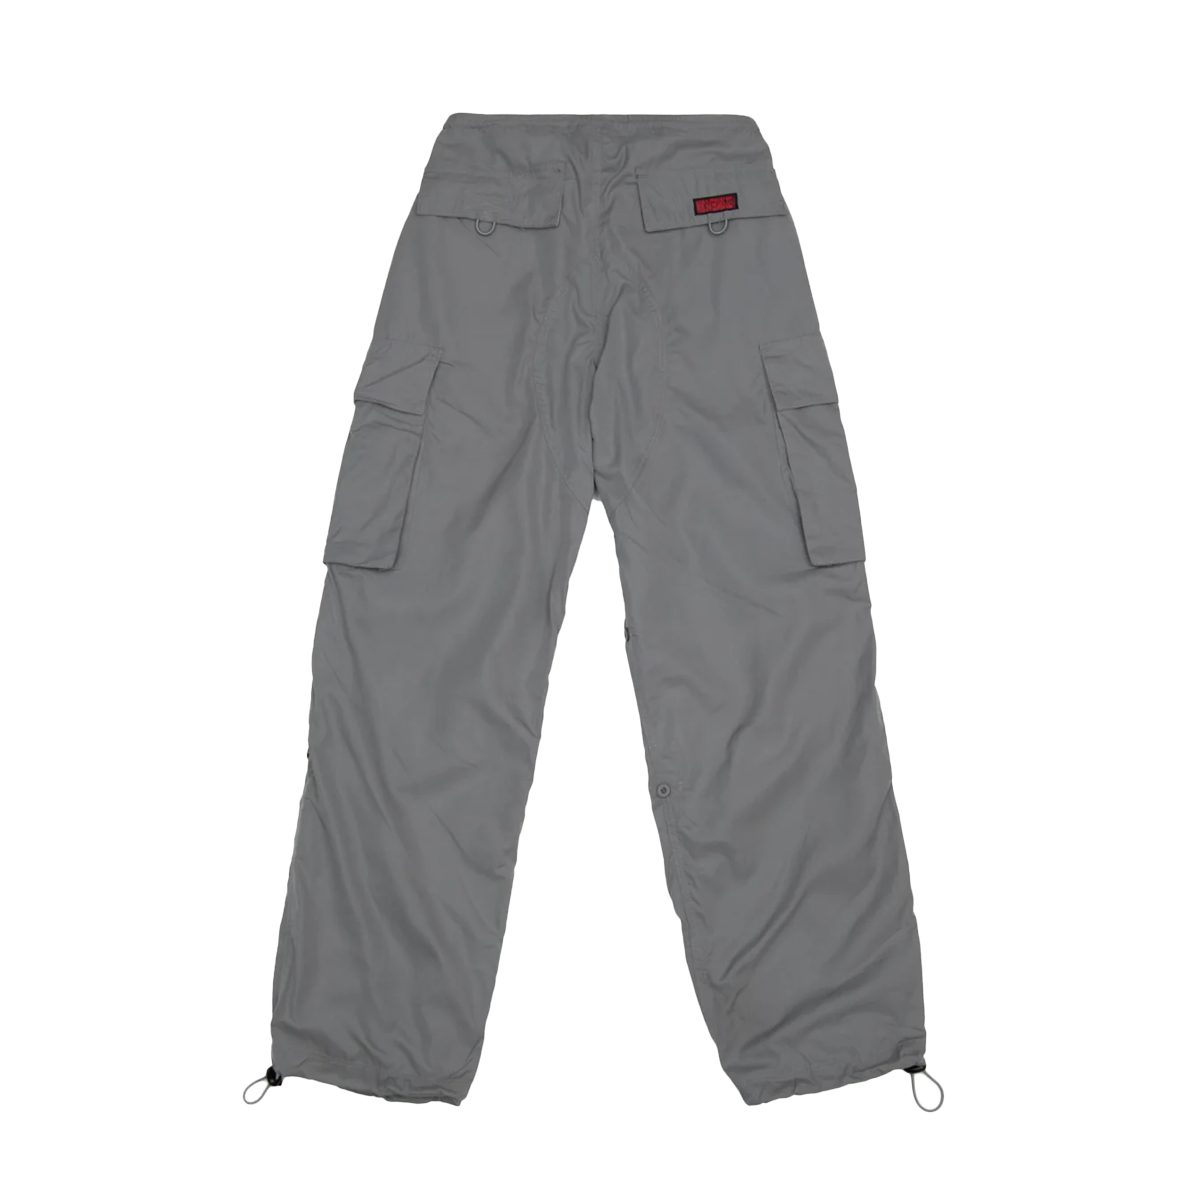 WKND Techie Dirtbags Pants - Silver